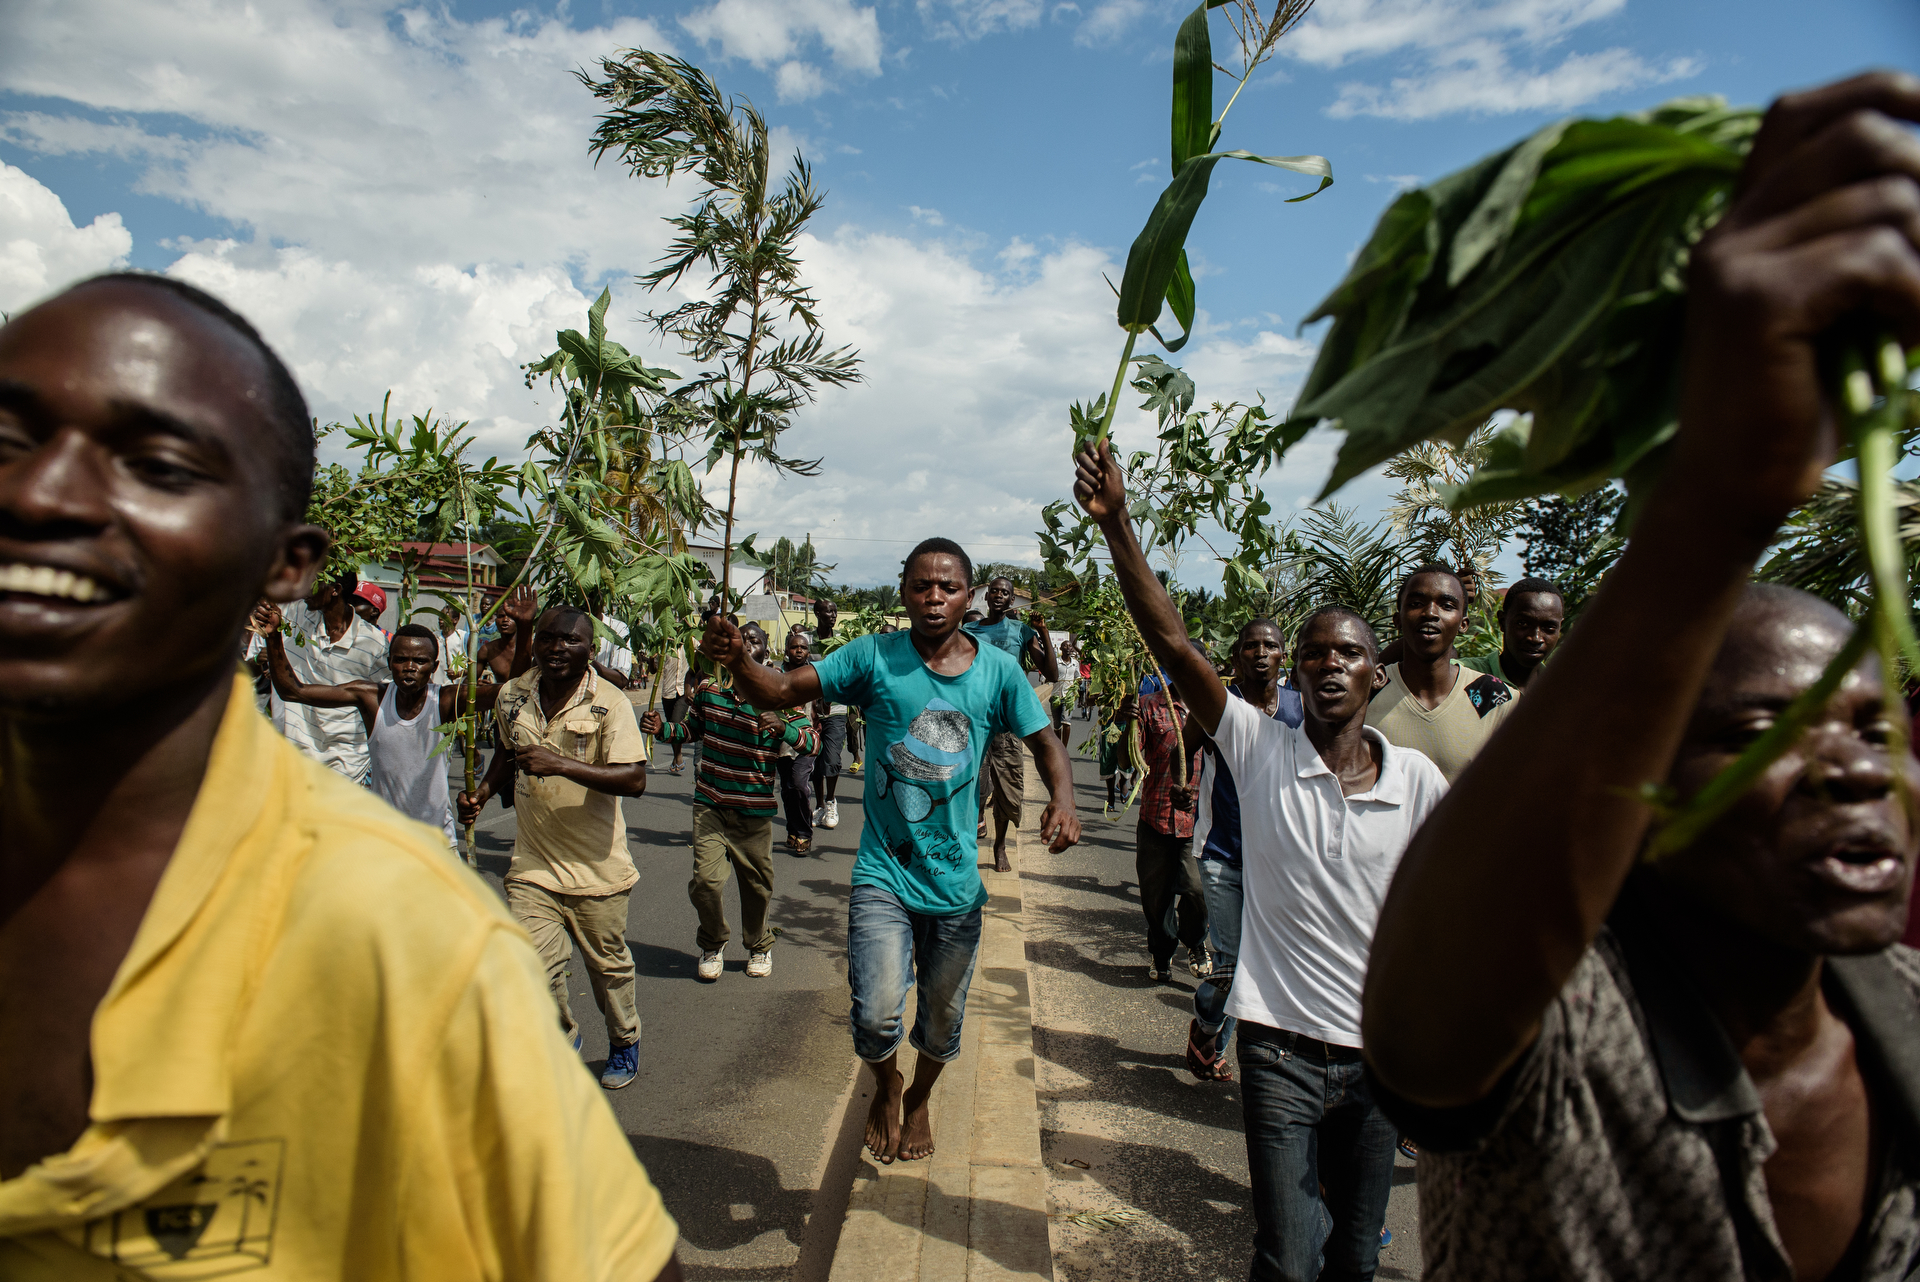  Following the radio announcement by Major General Godefroid Niyombare that President Nkurunziza was overthrown, people took to the streets to celebrate, waving branches, and parading through Bujumbura on 13 May. 